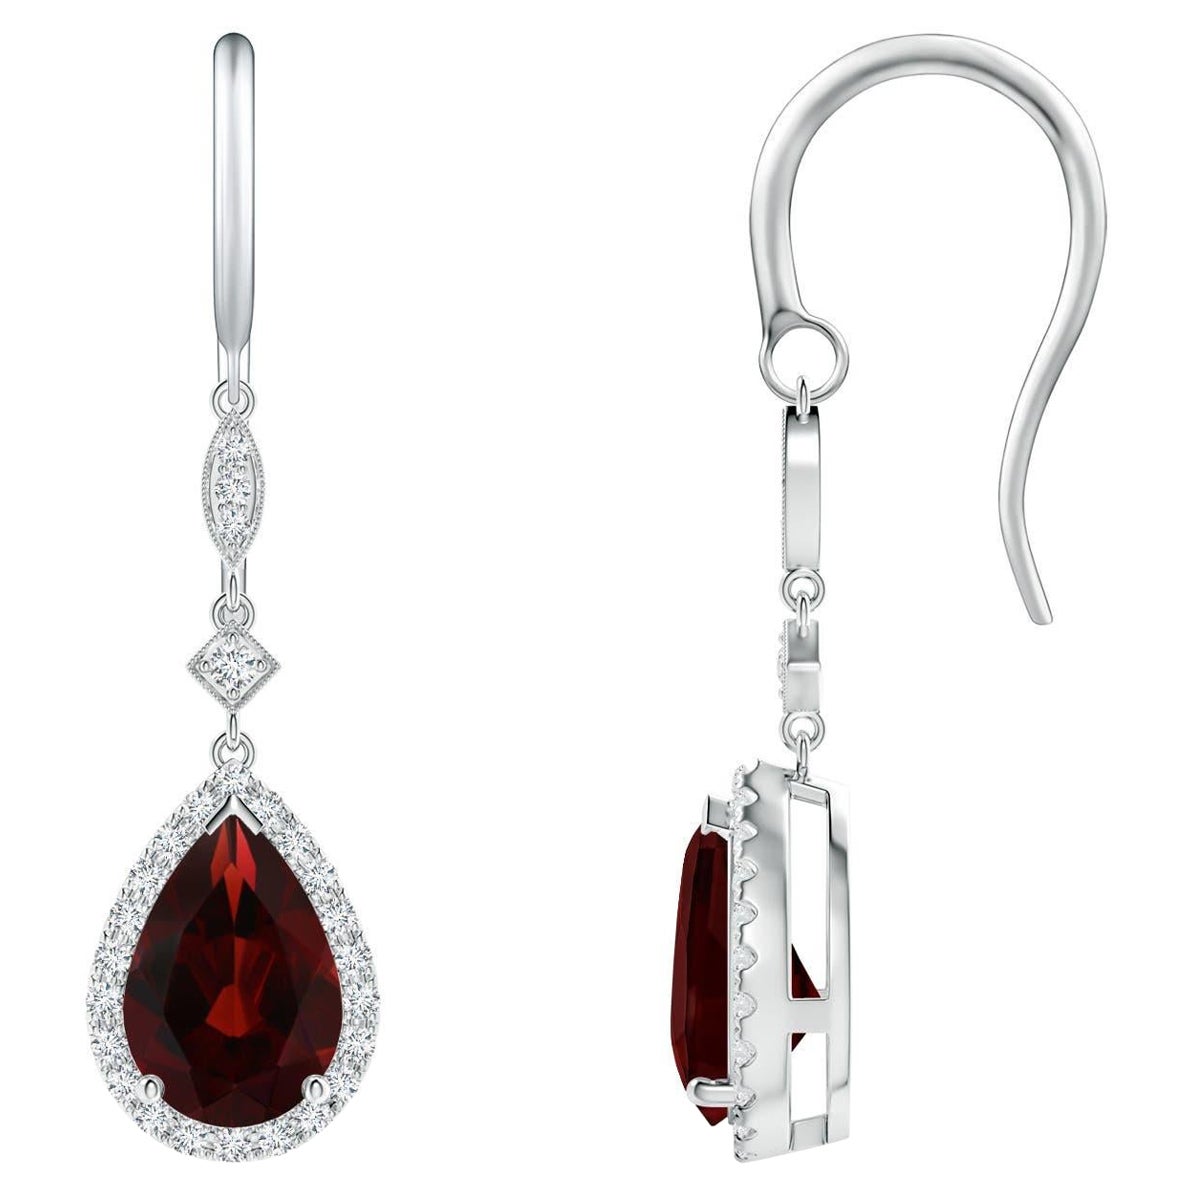 Natural Pear-Shaped 3ct Garnet Drop Earrings with Diamond in Platinum